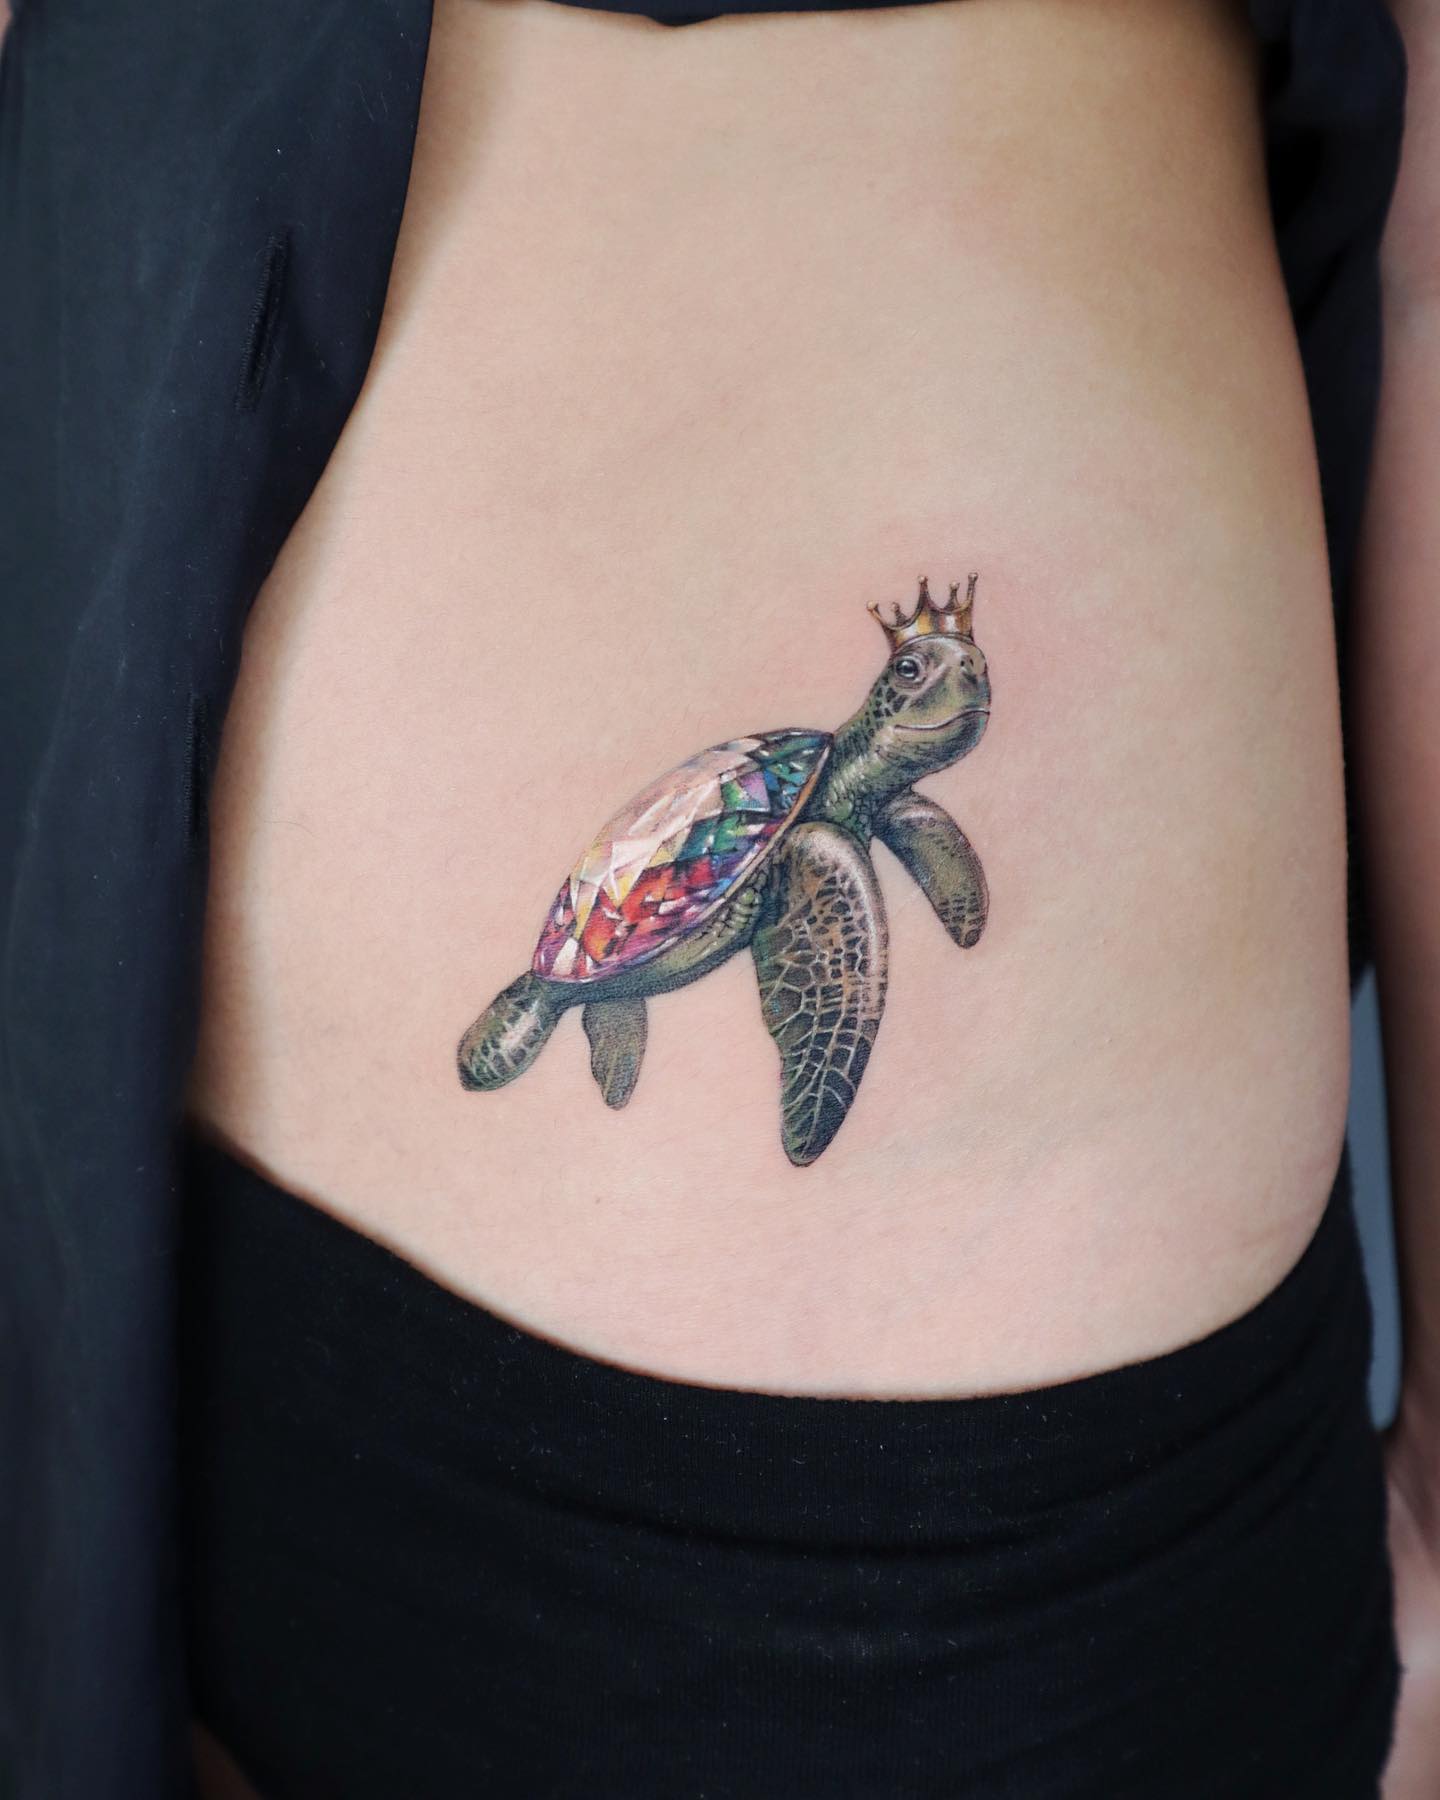 Wanna have a king or queen sea turtle tattoo that looks super-real? If your answer is yes, cover the sea turtle's shell with a gemstone to give it a rich look and put king's crown on its head.